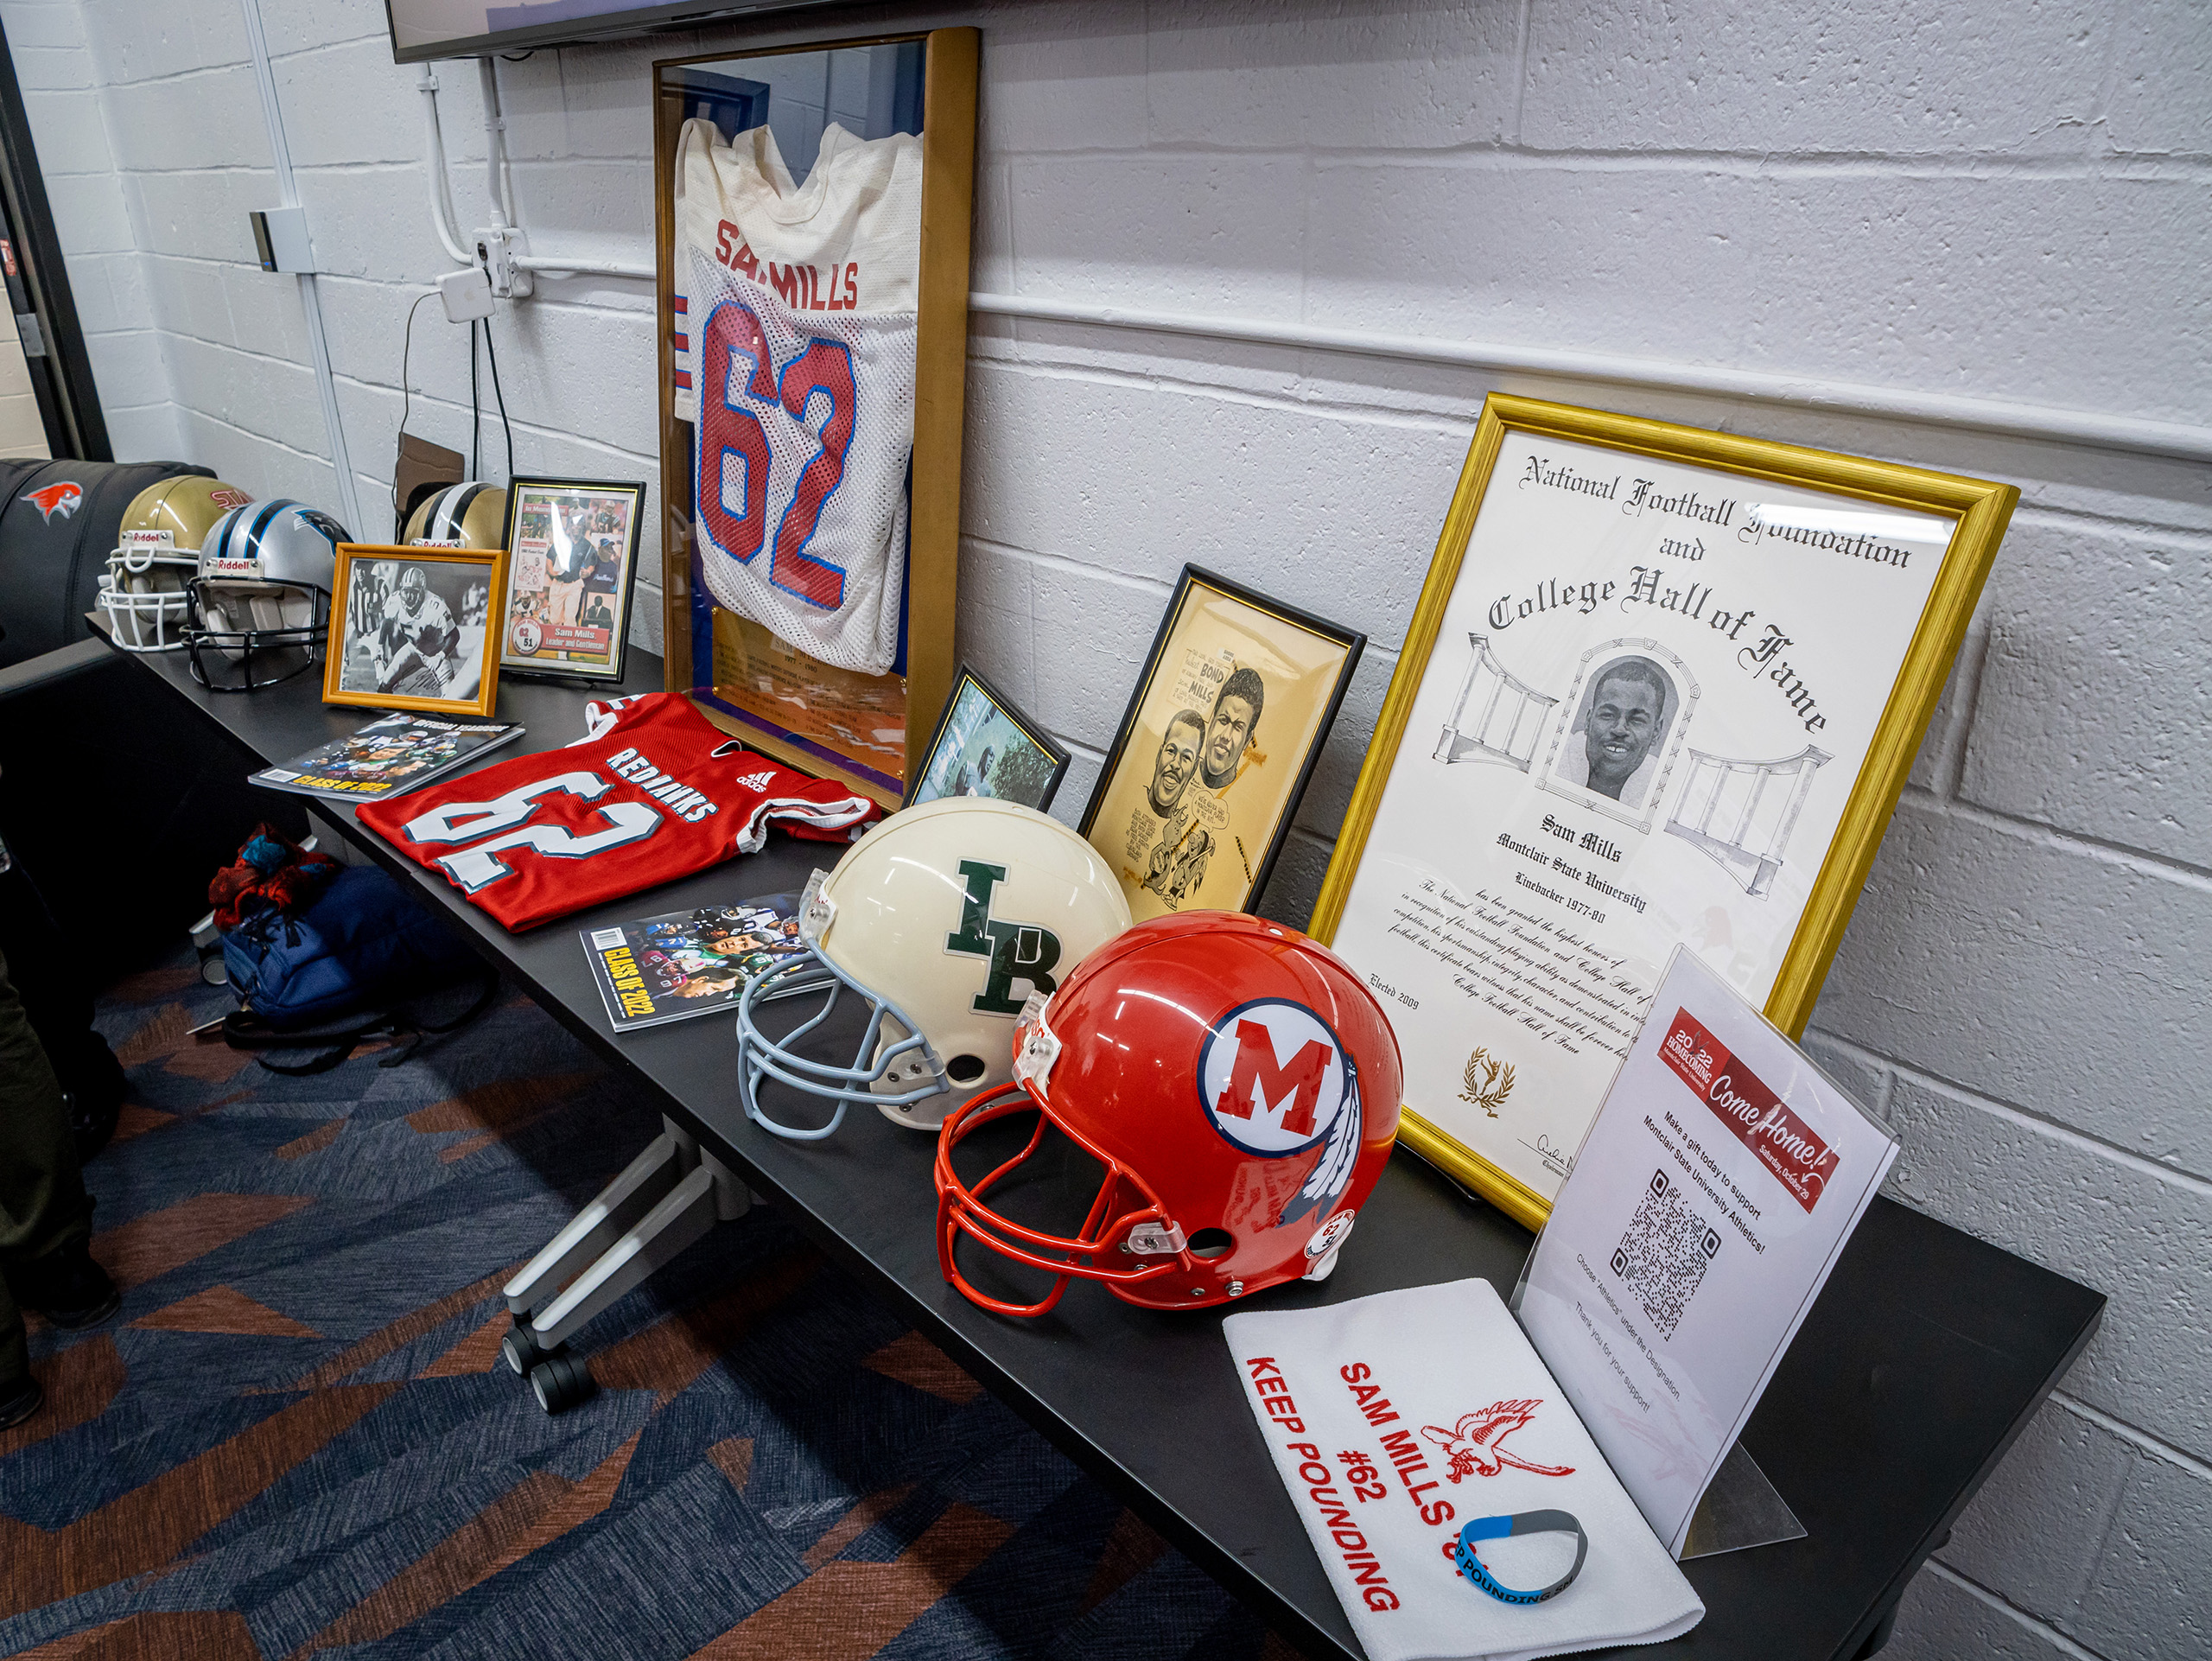 Sam Mills helmets, framed jersey, and other memorabilia on table